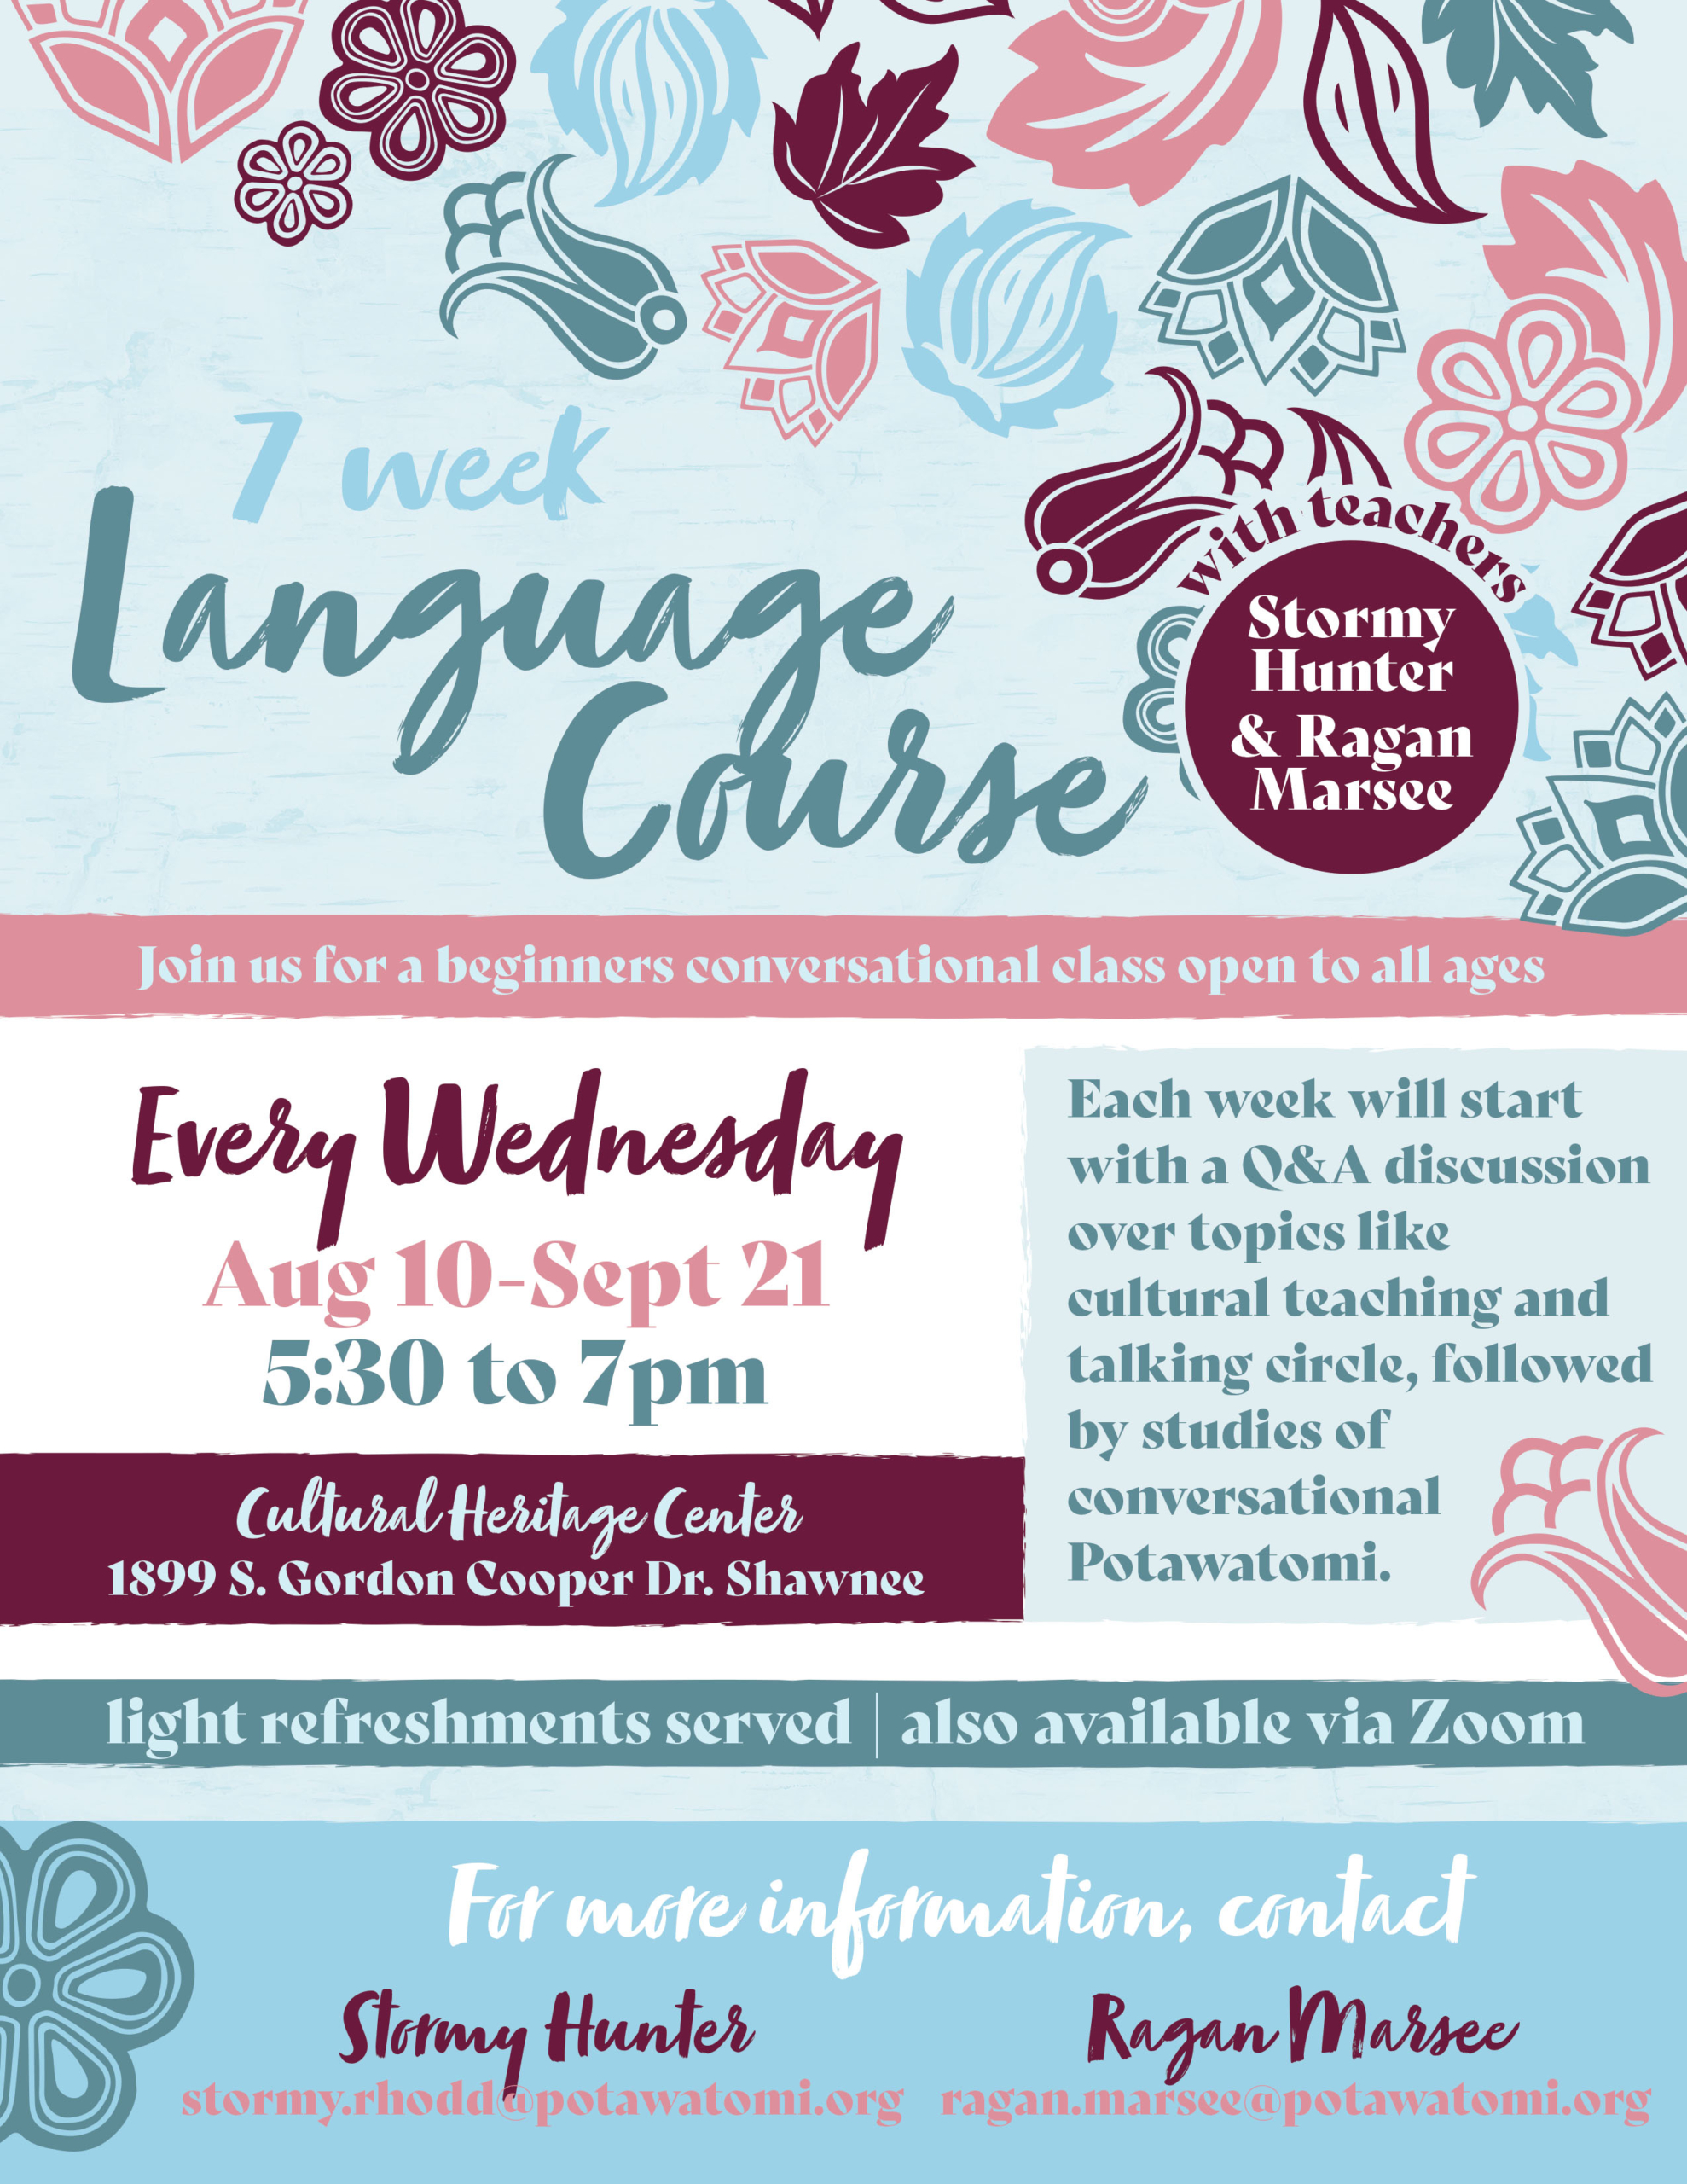 teal, blue, pink and purple floral designs spread across this flyer advertising the 7-week Potawatomi language class running August 10 - September 21 at the CPN Cultural Heritage Center.